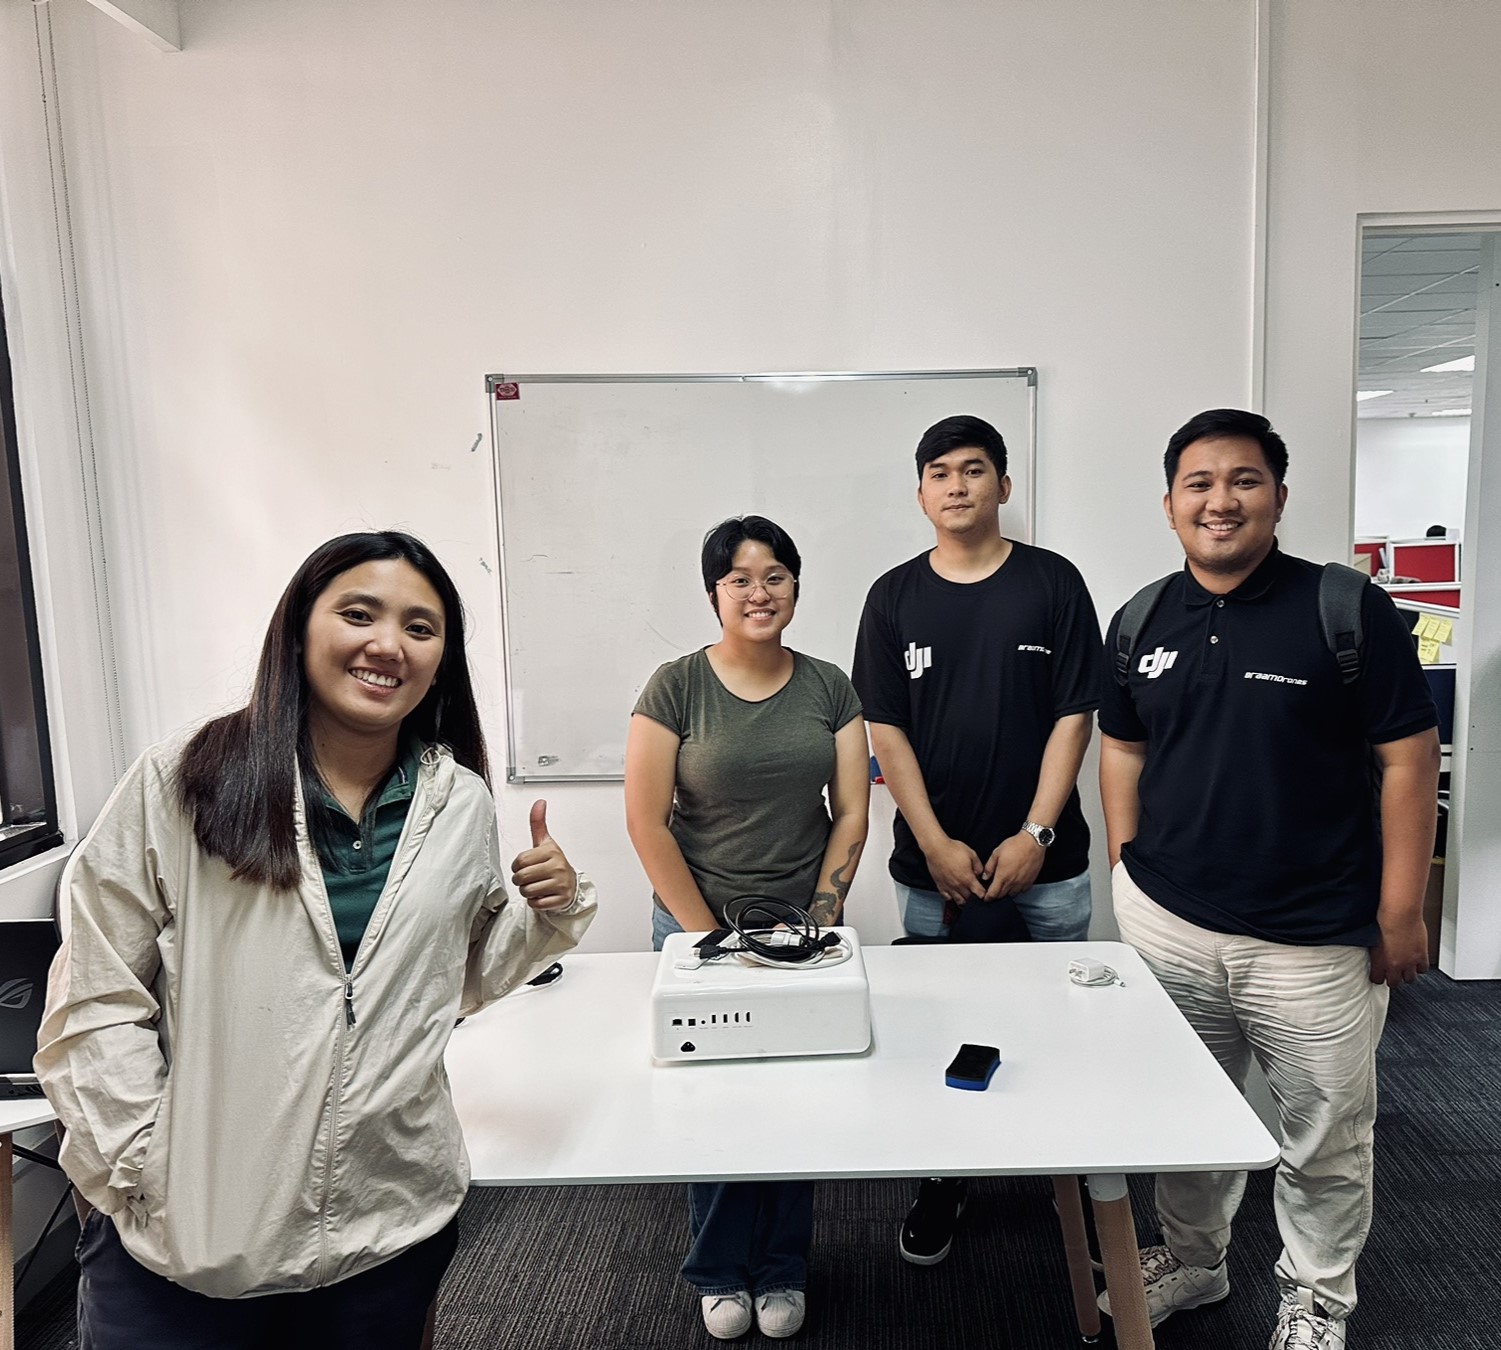 Thank you very much DJI Philippines for another round of technical training